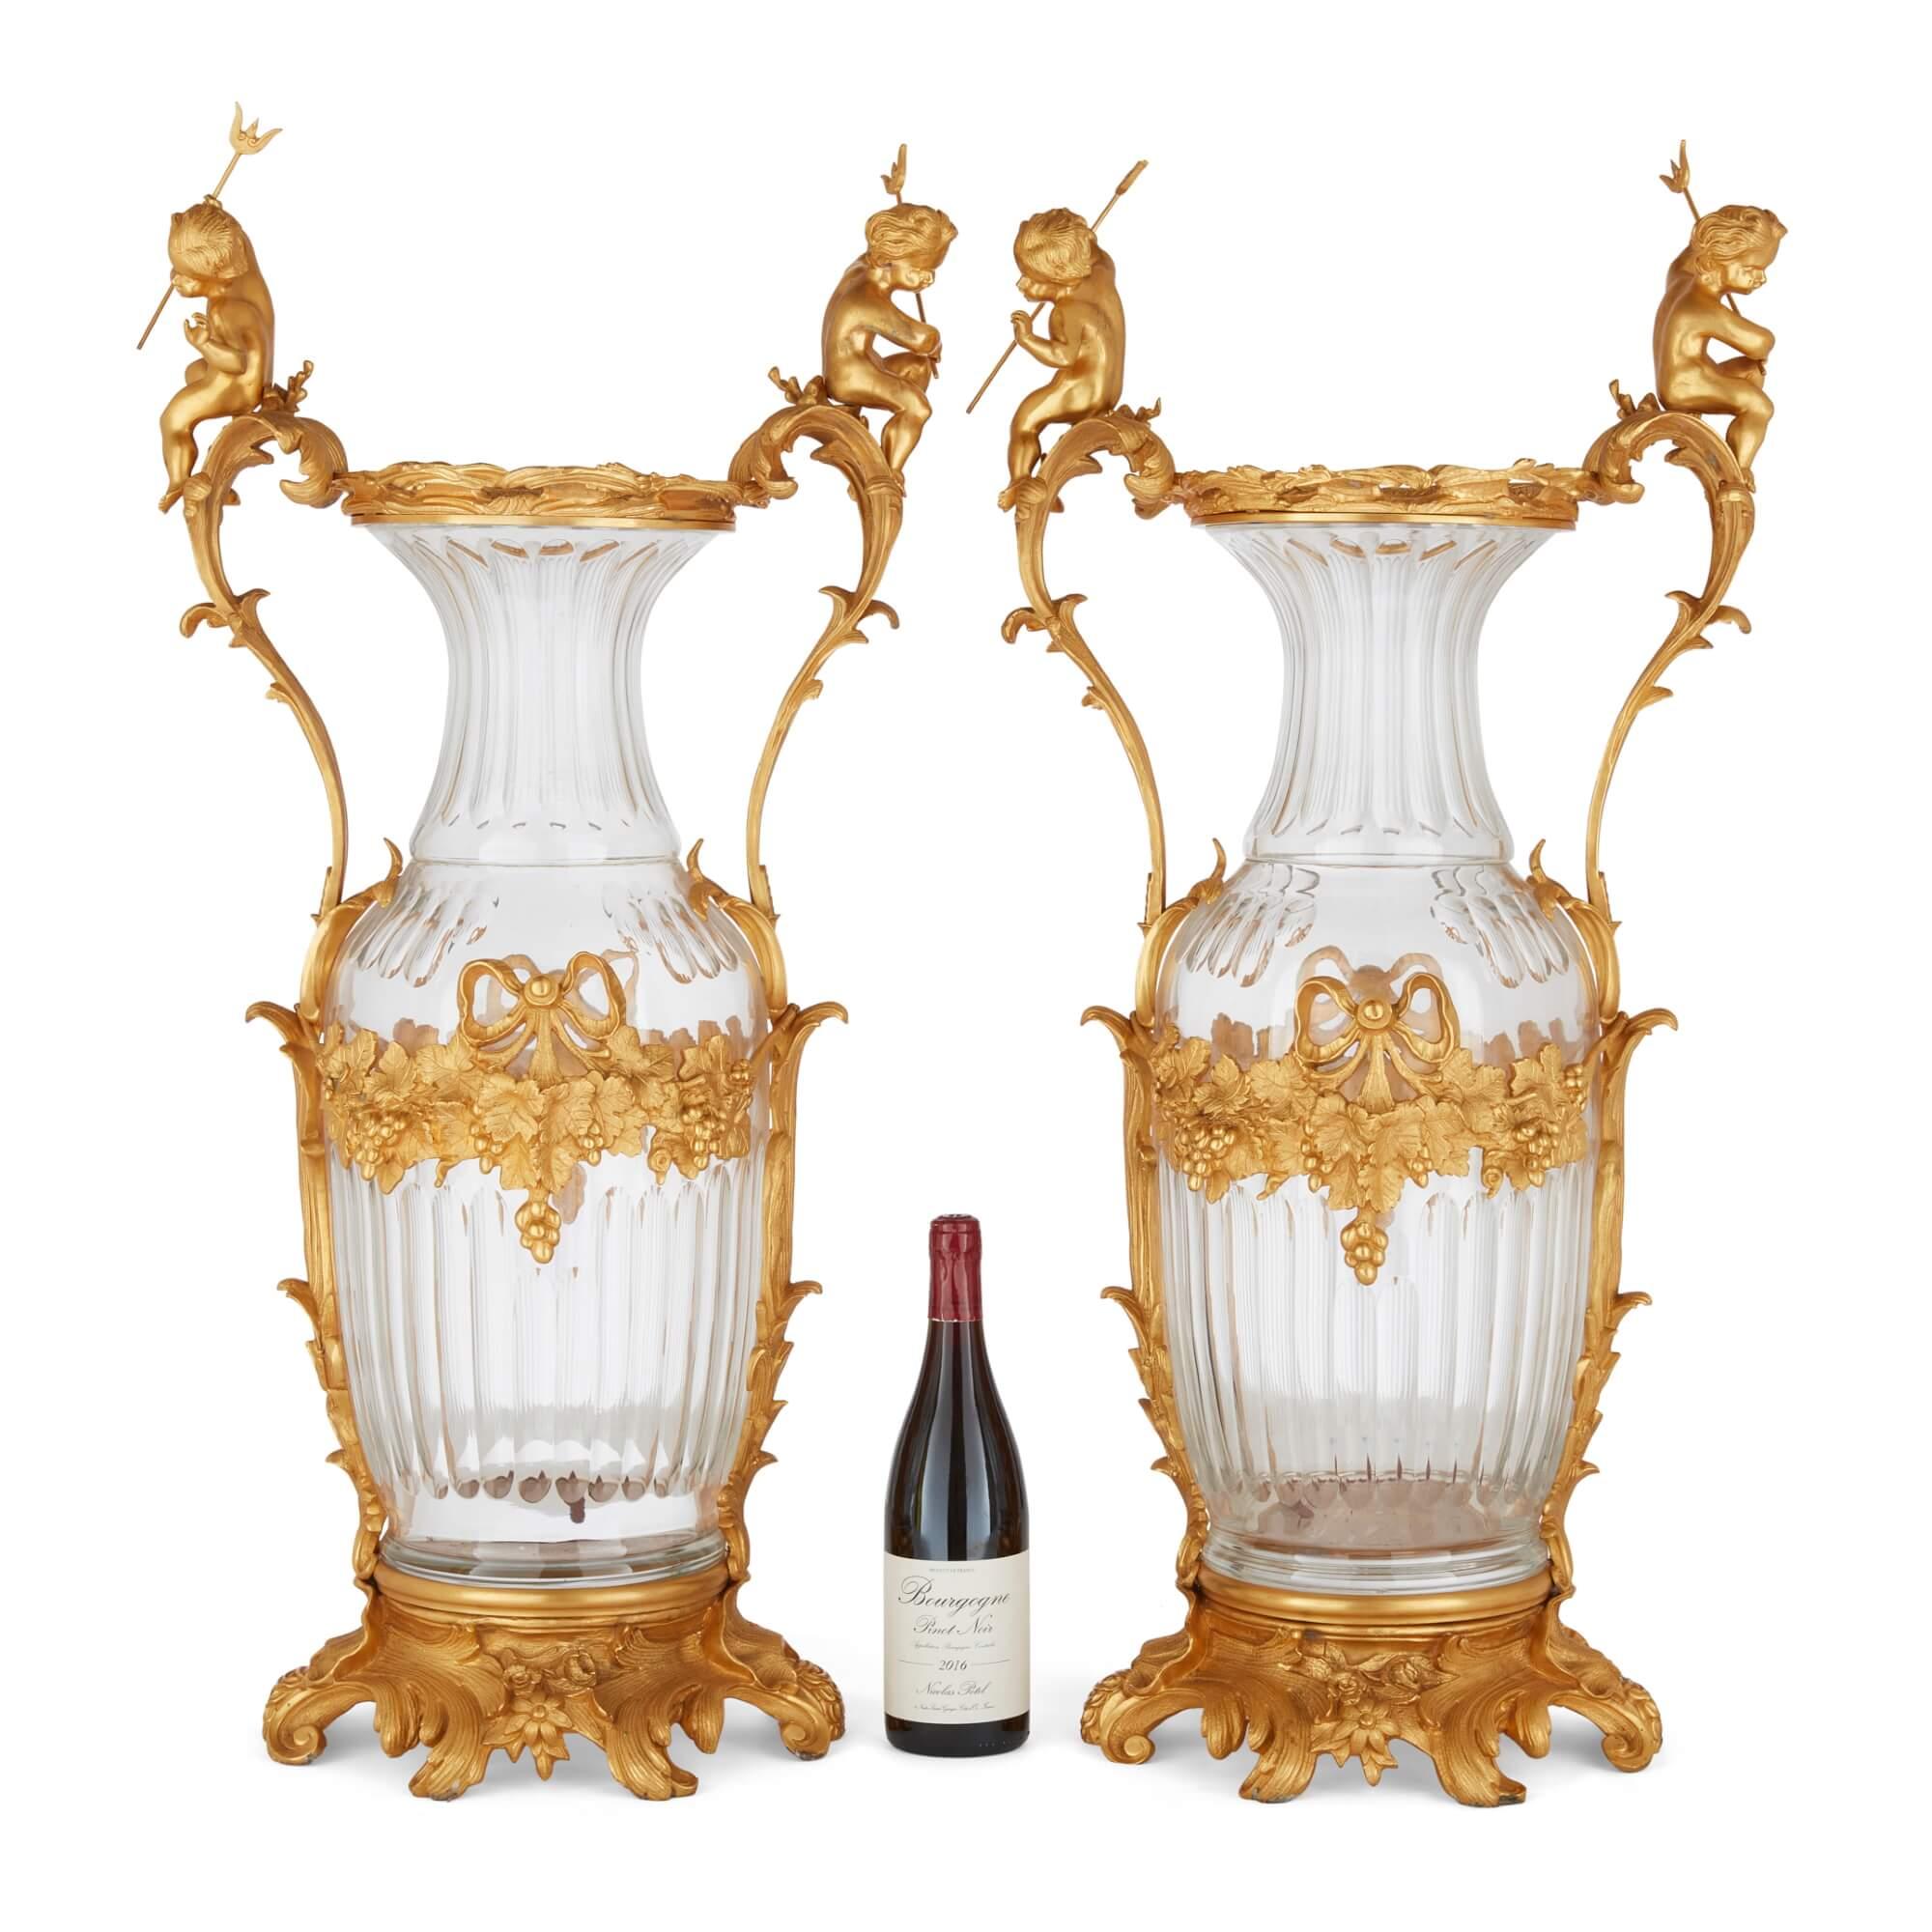 Large Pair of French Rococo Style Ormolu-Mounted Cut Glass Vases  For Sale 4